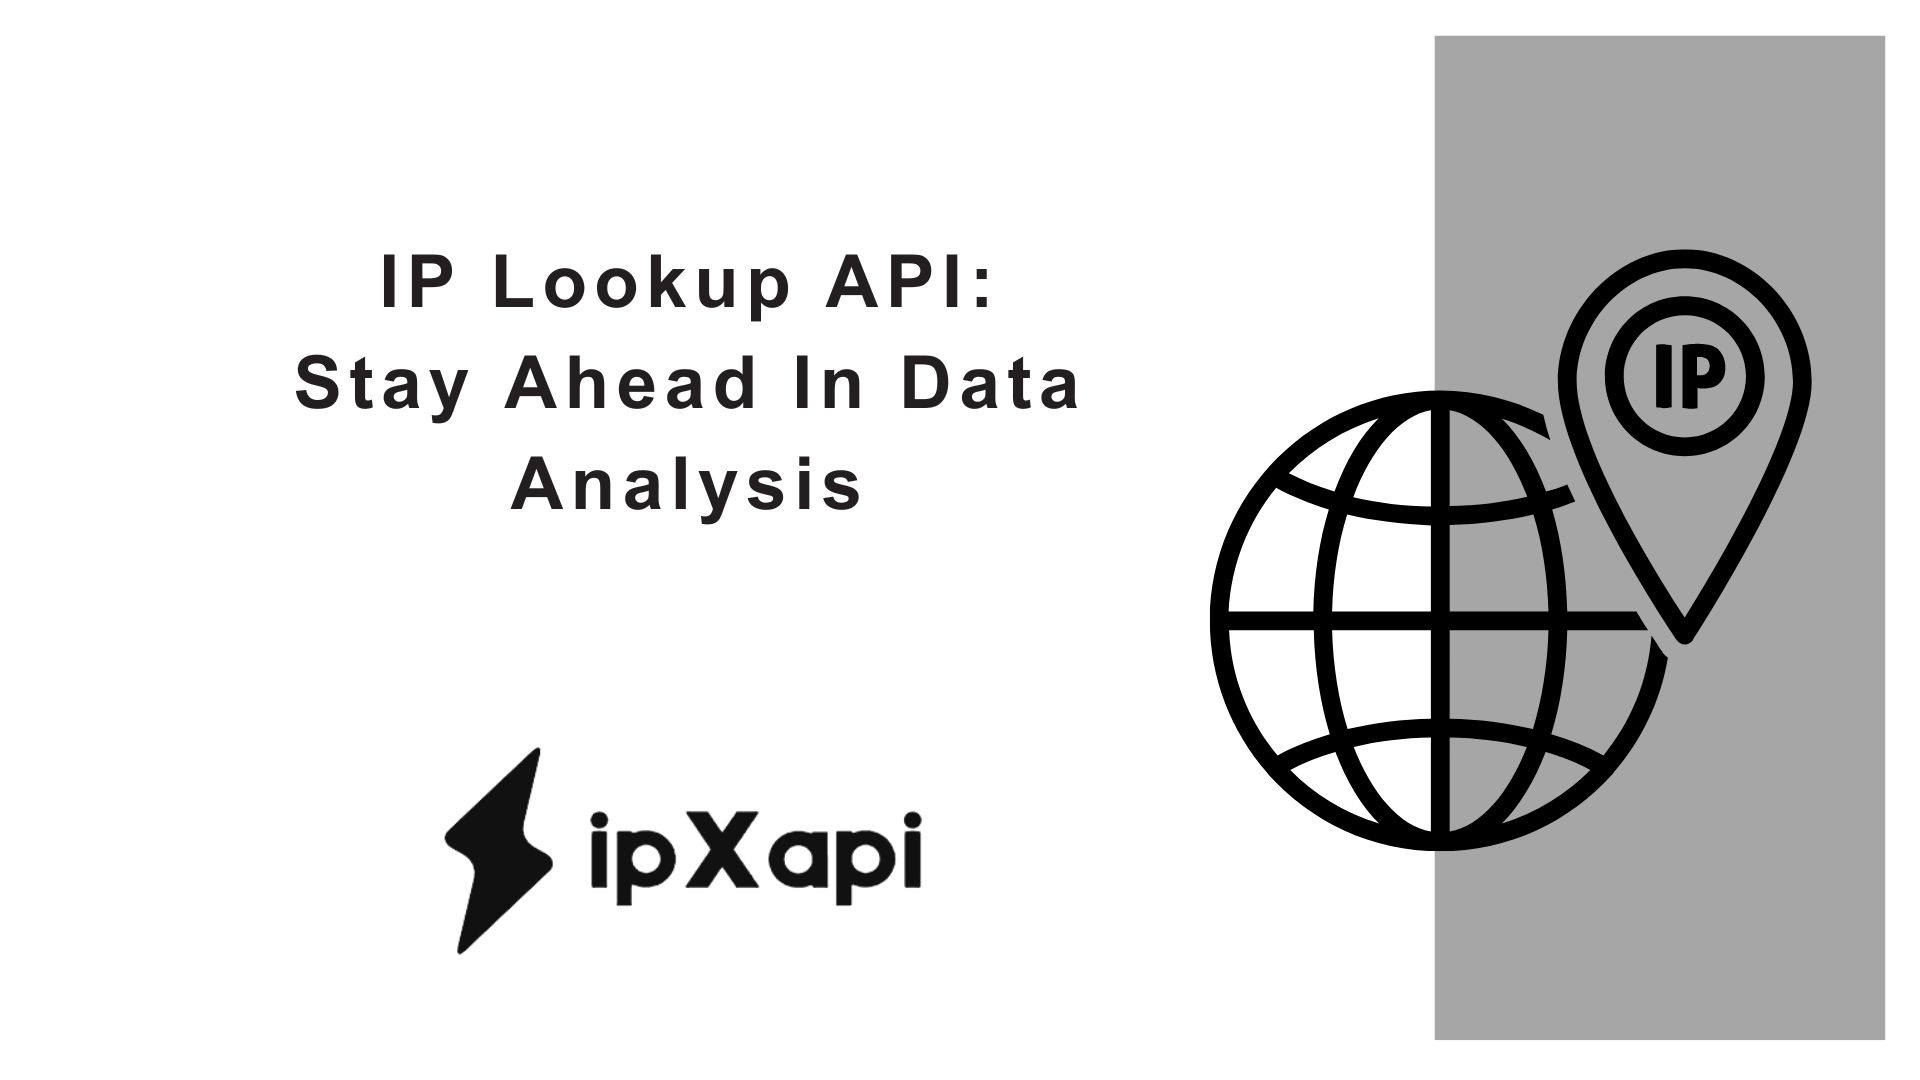 IP Lookup API: Stay Ahead In Data Analysis